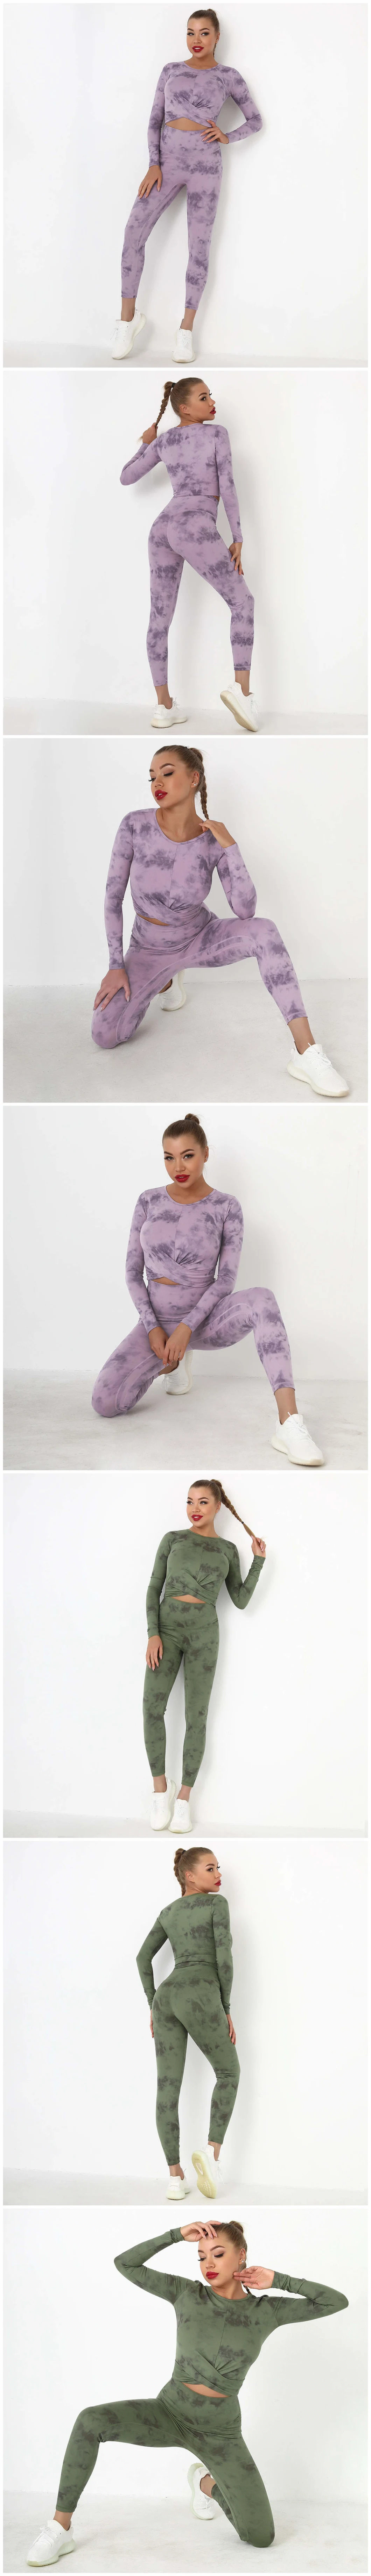 China Wholesale Sports Wear Fitness Clothing High Waisted Workout Tie Dye Tights Woman Yoga Pants Leggings